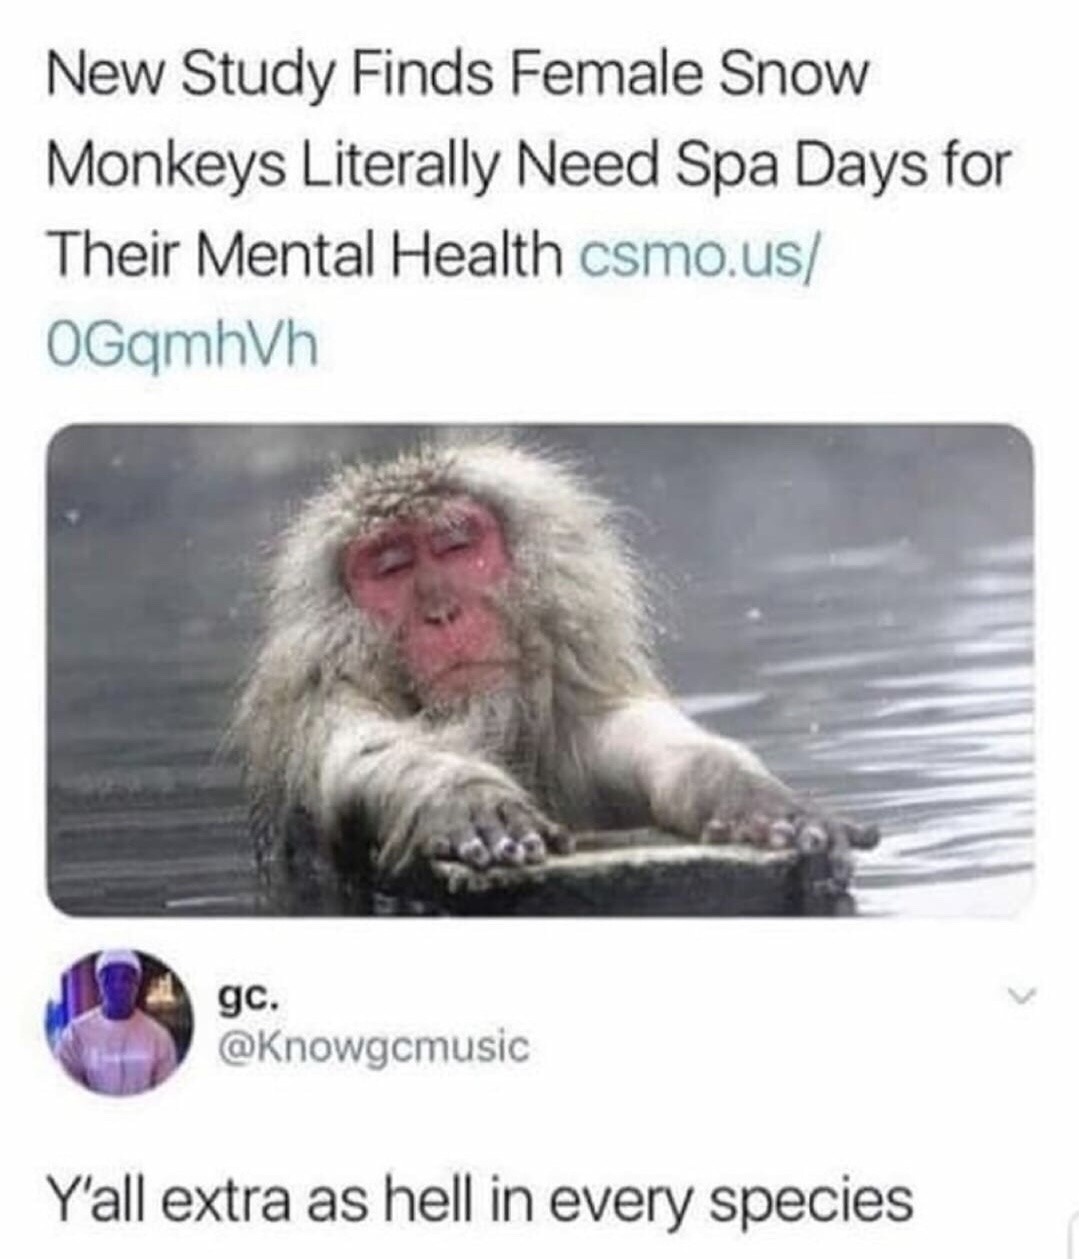 New Study Finds Female Snow Monkeys Literally Need Spa Days for Their Mental Health csmo.us OGqmhVh gc. Y'all extra as hell in every species